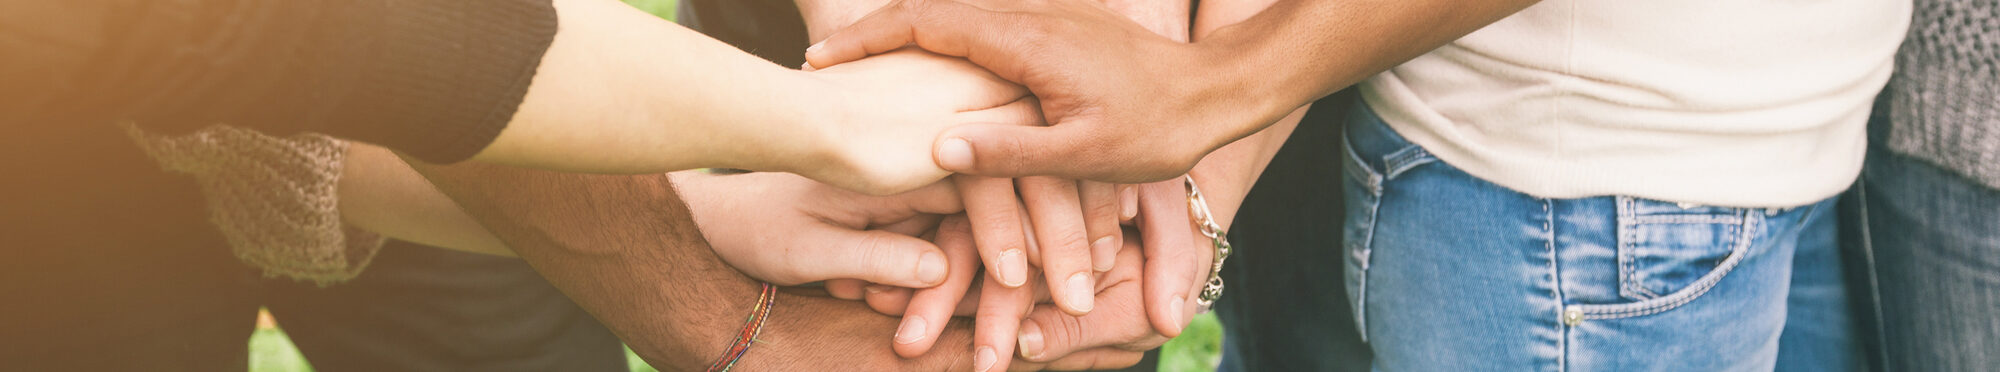 Multiracial Group of Friends with Hands in Stack, Teamwork